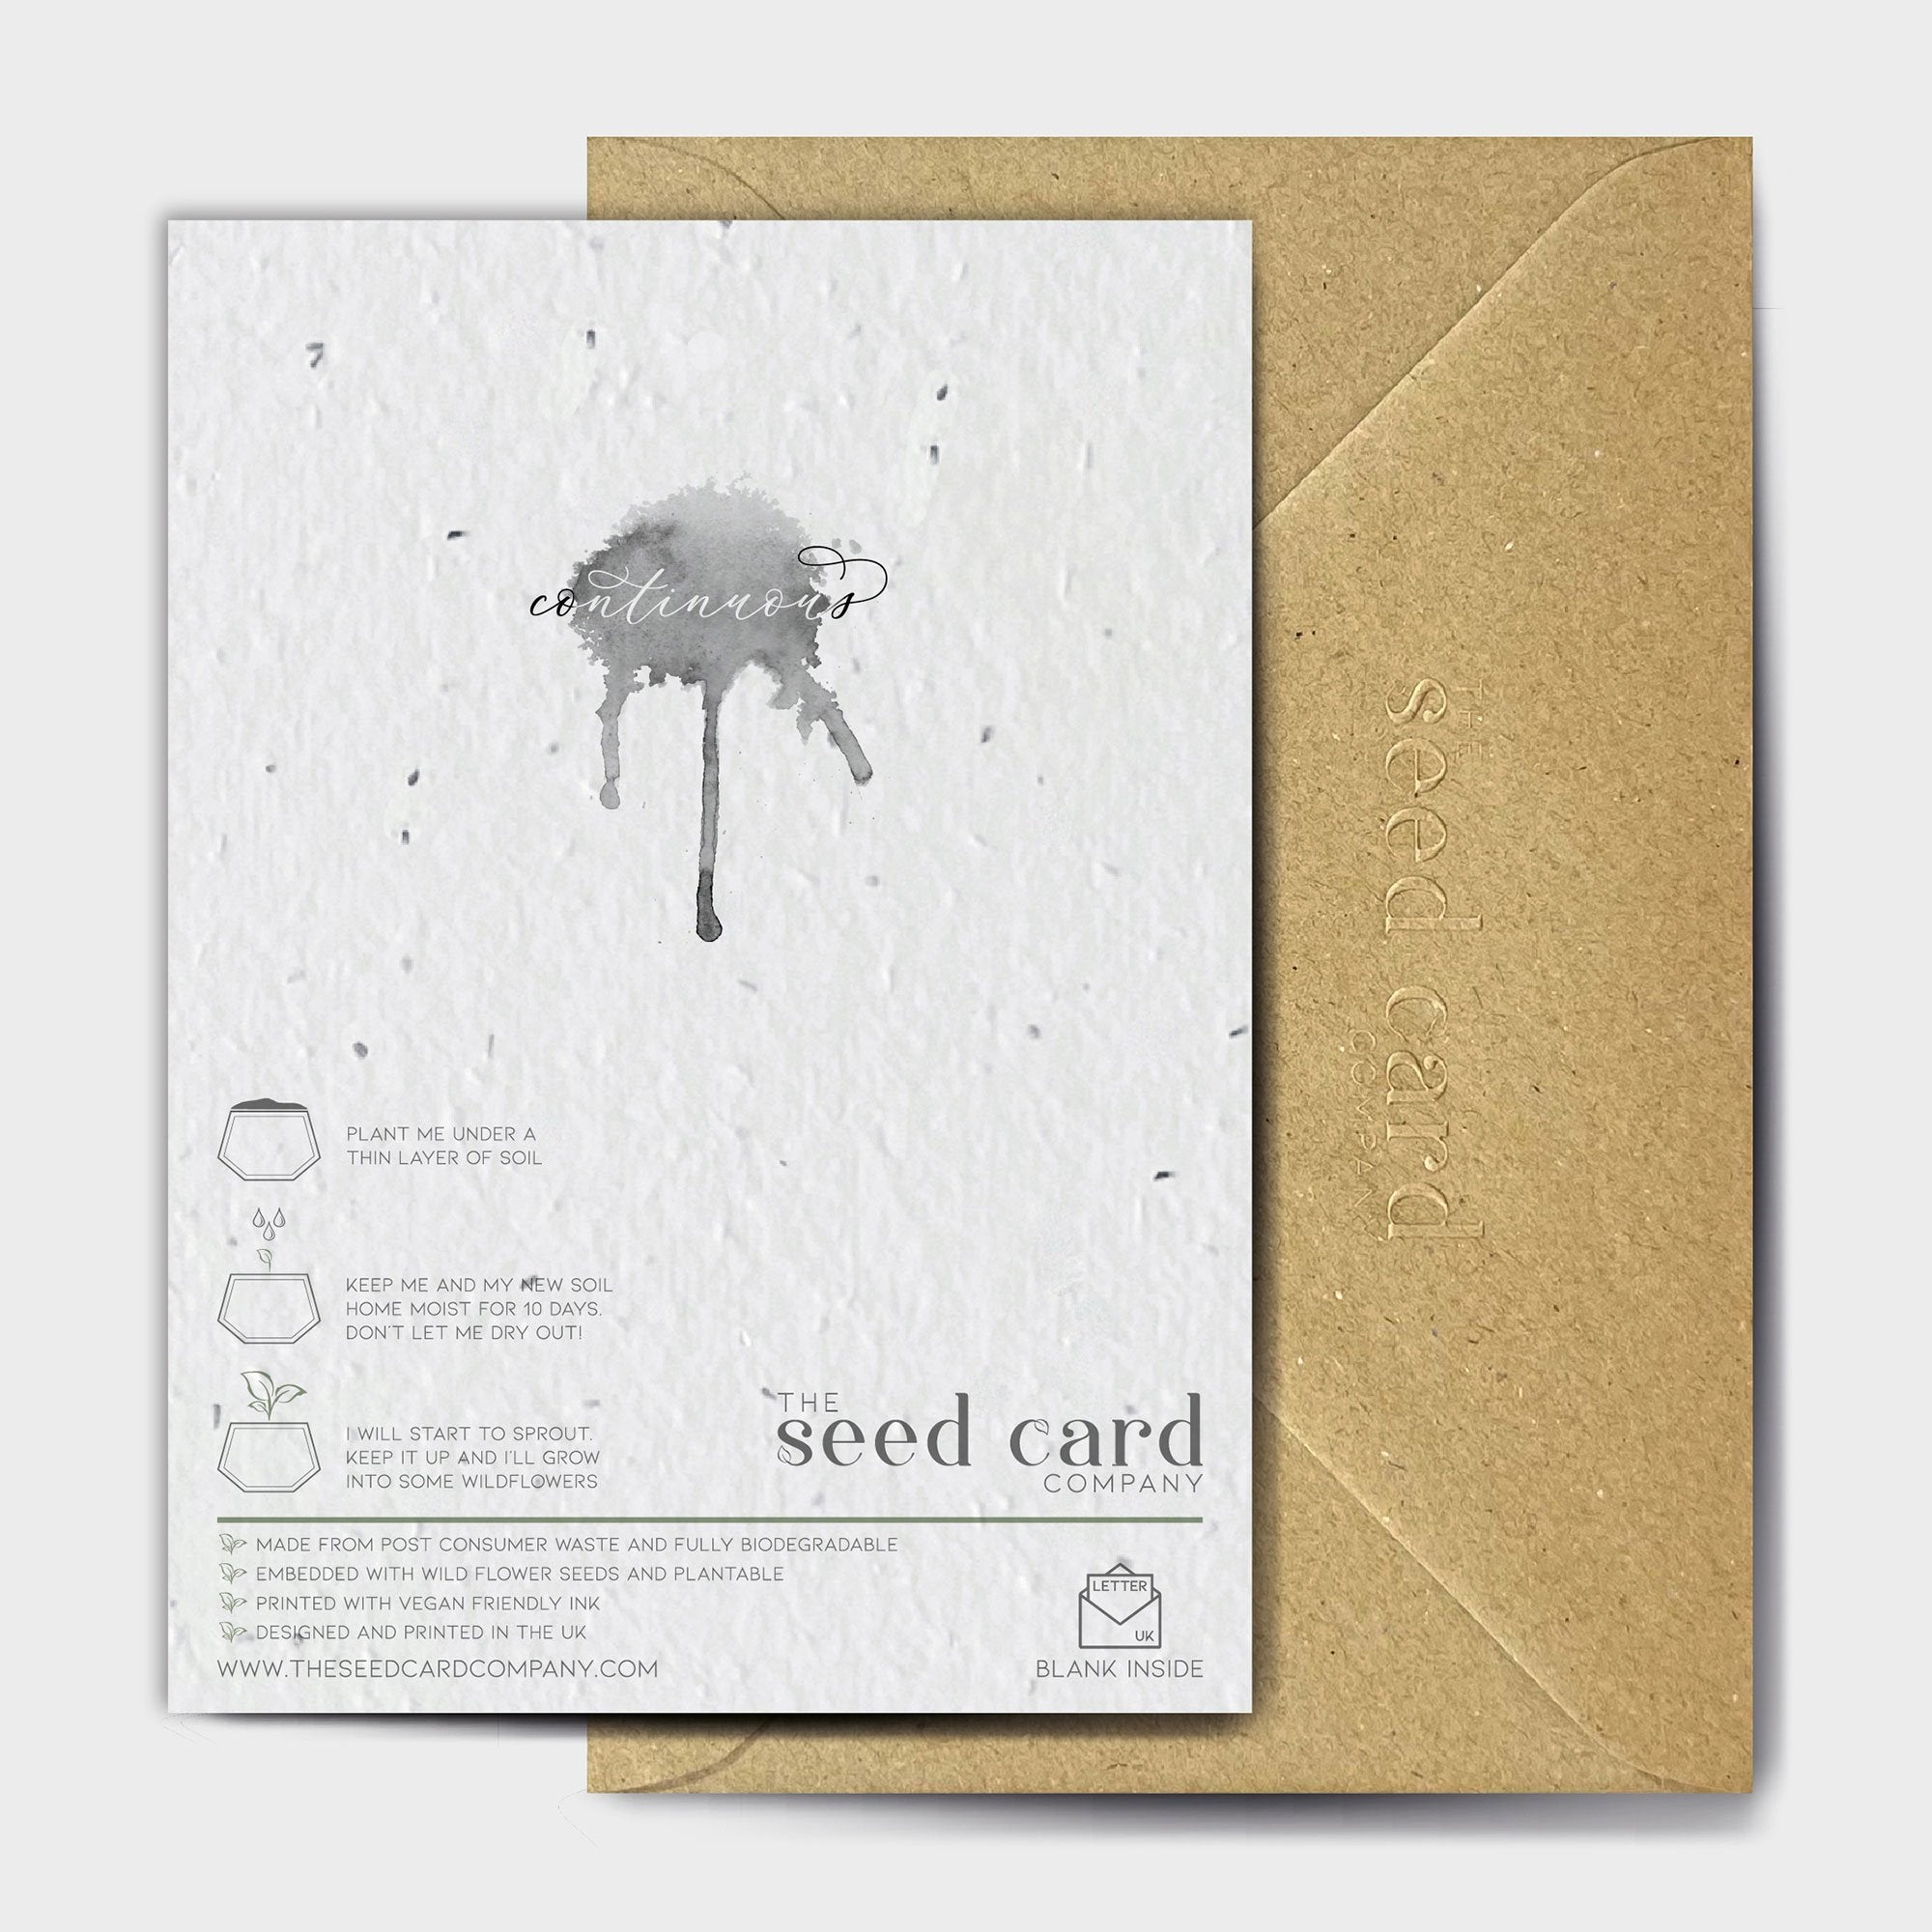 Shop online Frothy Coffee - 100% biodegradable seed-embedded cards Shop -The Seed Card Company